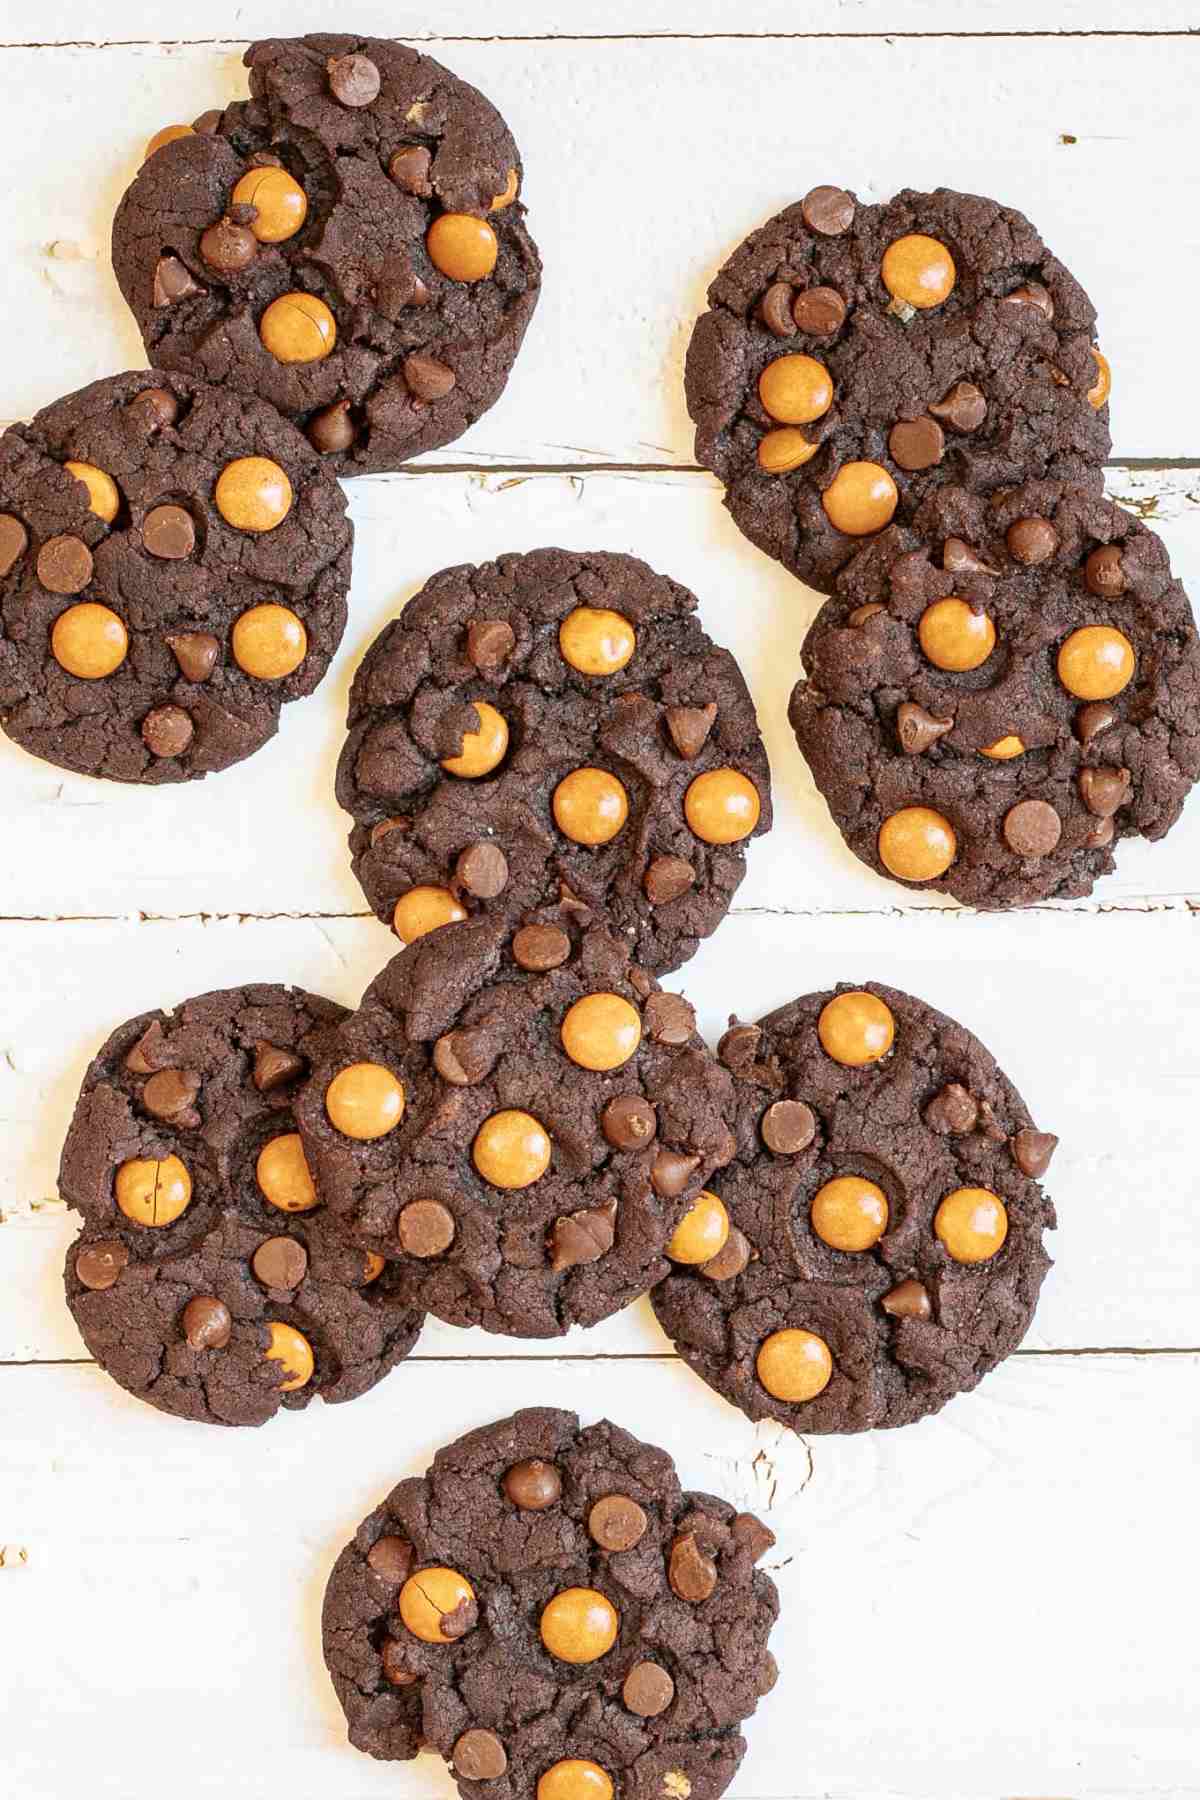 Dark brown cookies with orange m&ms, and chocolate chips on a white wooden surface. A hand is grabbing one.